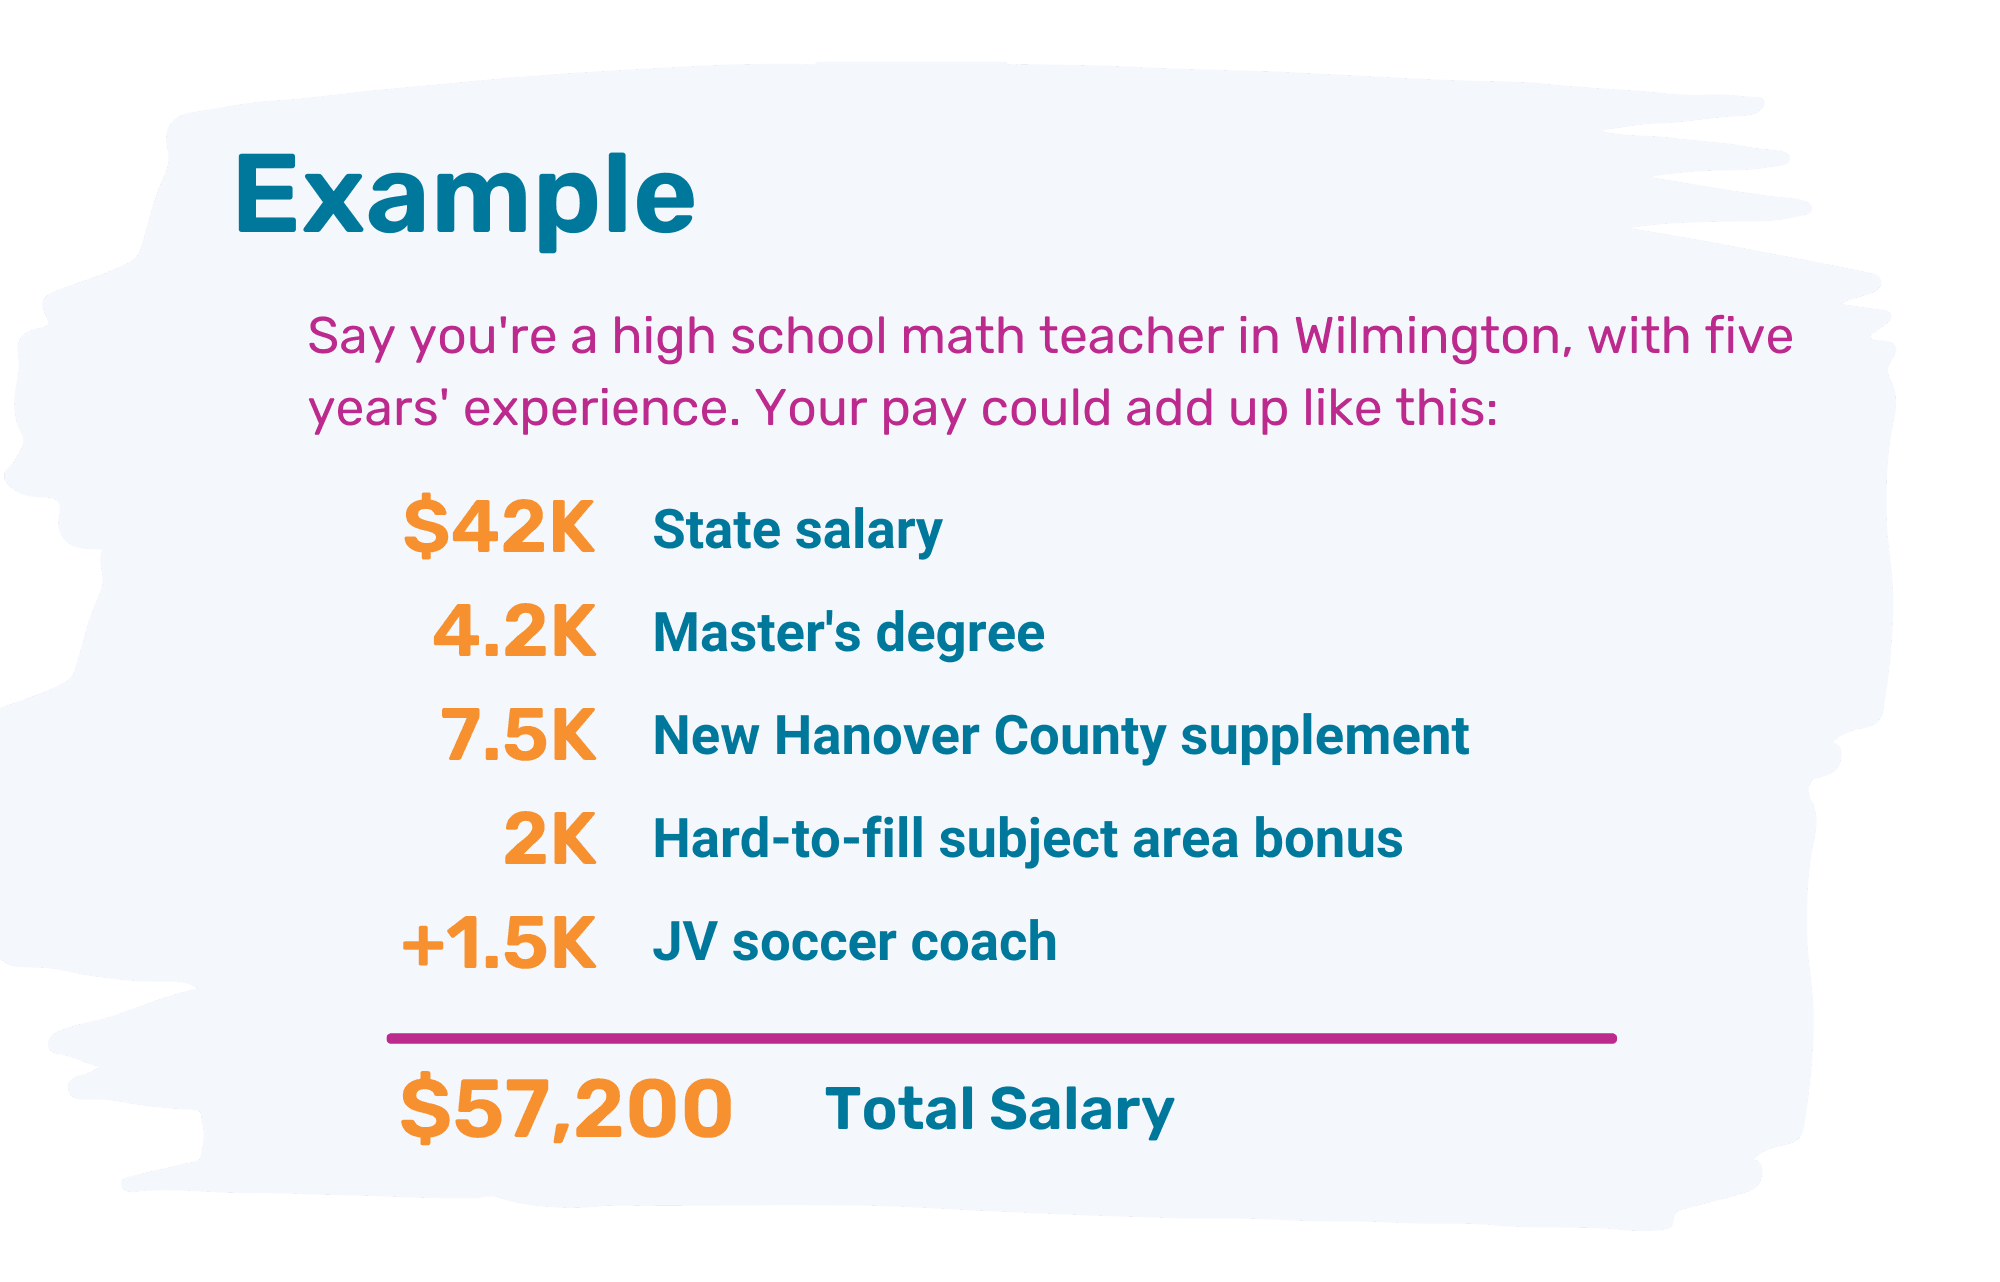 An example of how a teacher could increase salary. A high school math teacher in Wilmington with 5 years' experience could earn a $42K base salary, plus additional pay for a master’s degree + county salary supplement + hard-to-fill subject area bonus + coaching JV soccer, adding up to total pay of $57,200.   